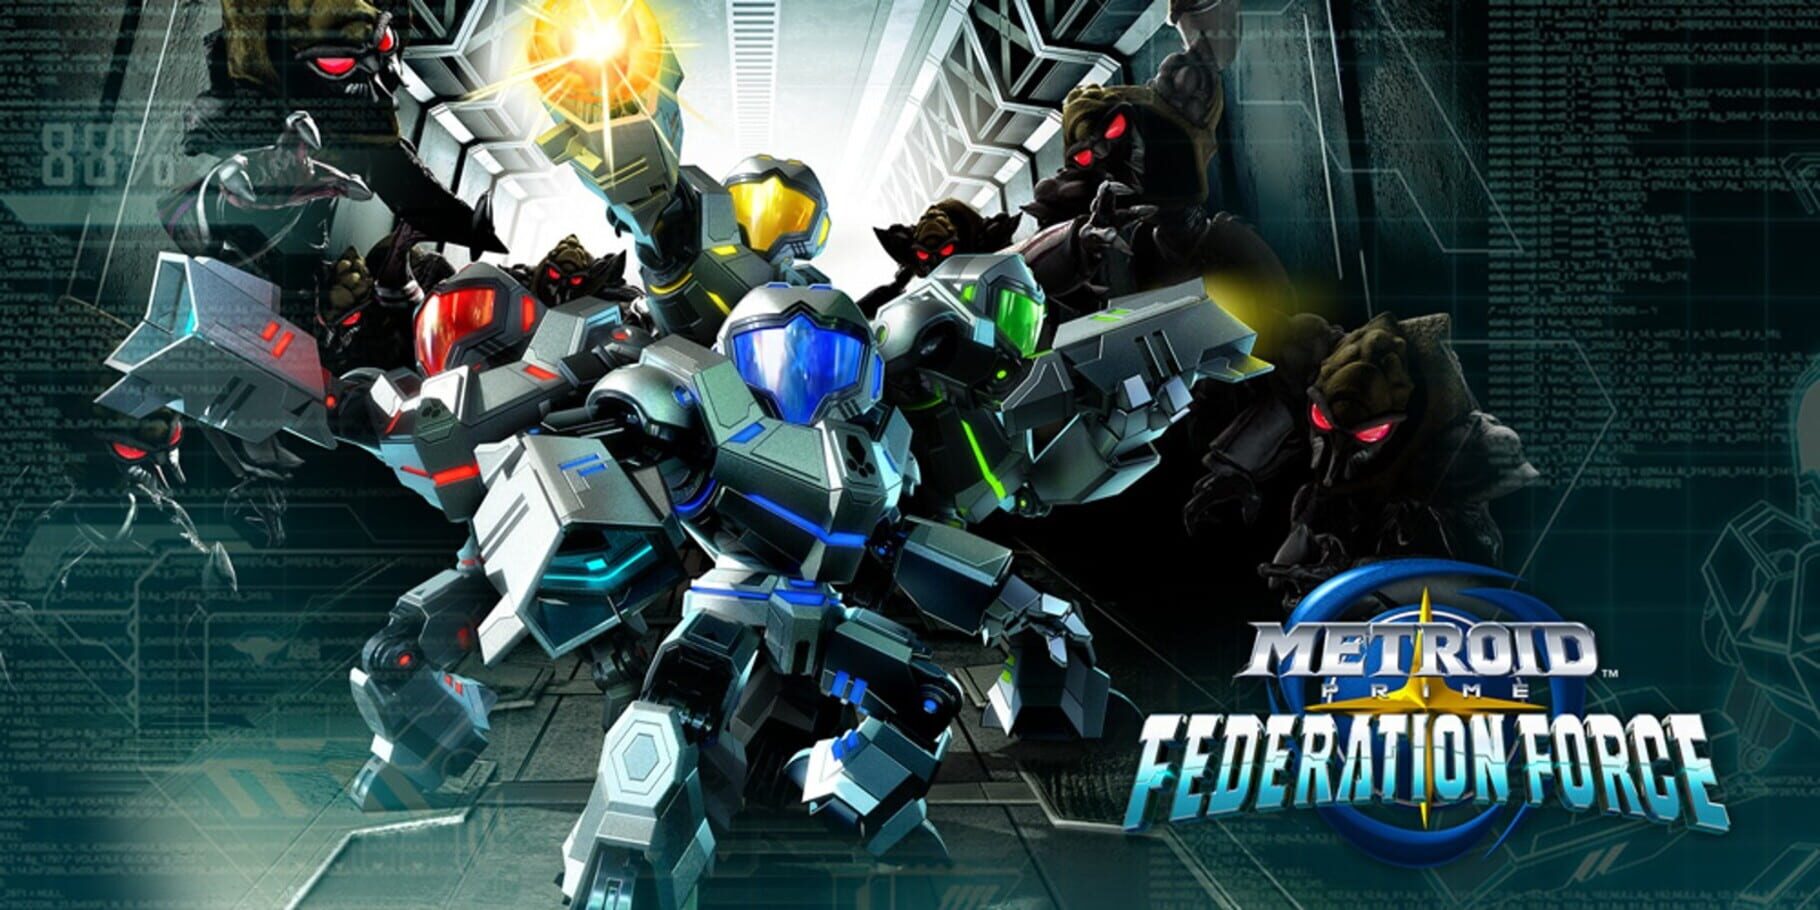 Artwork for Metroid Prime: Federation Force